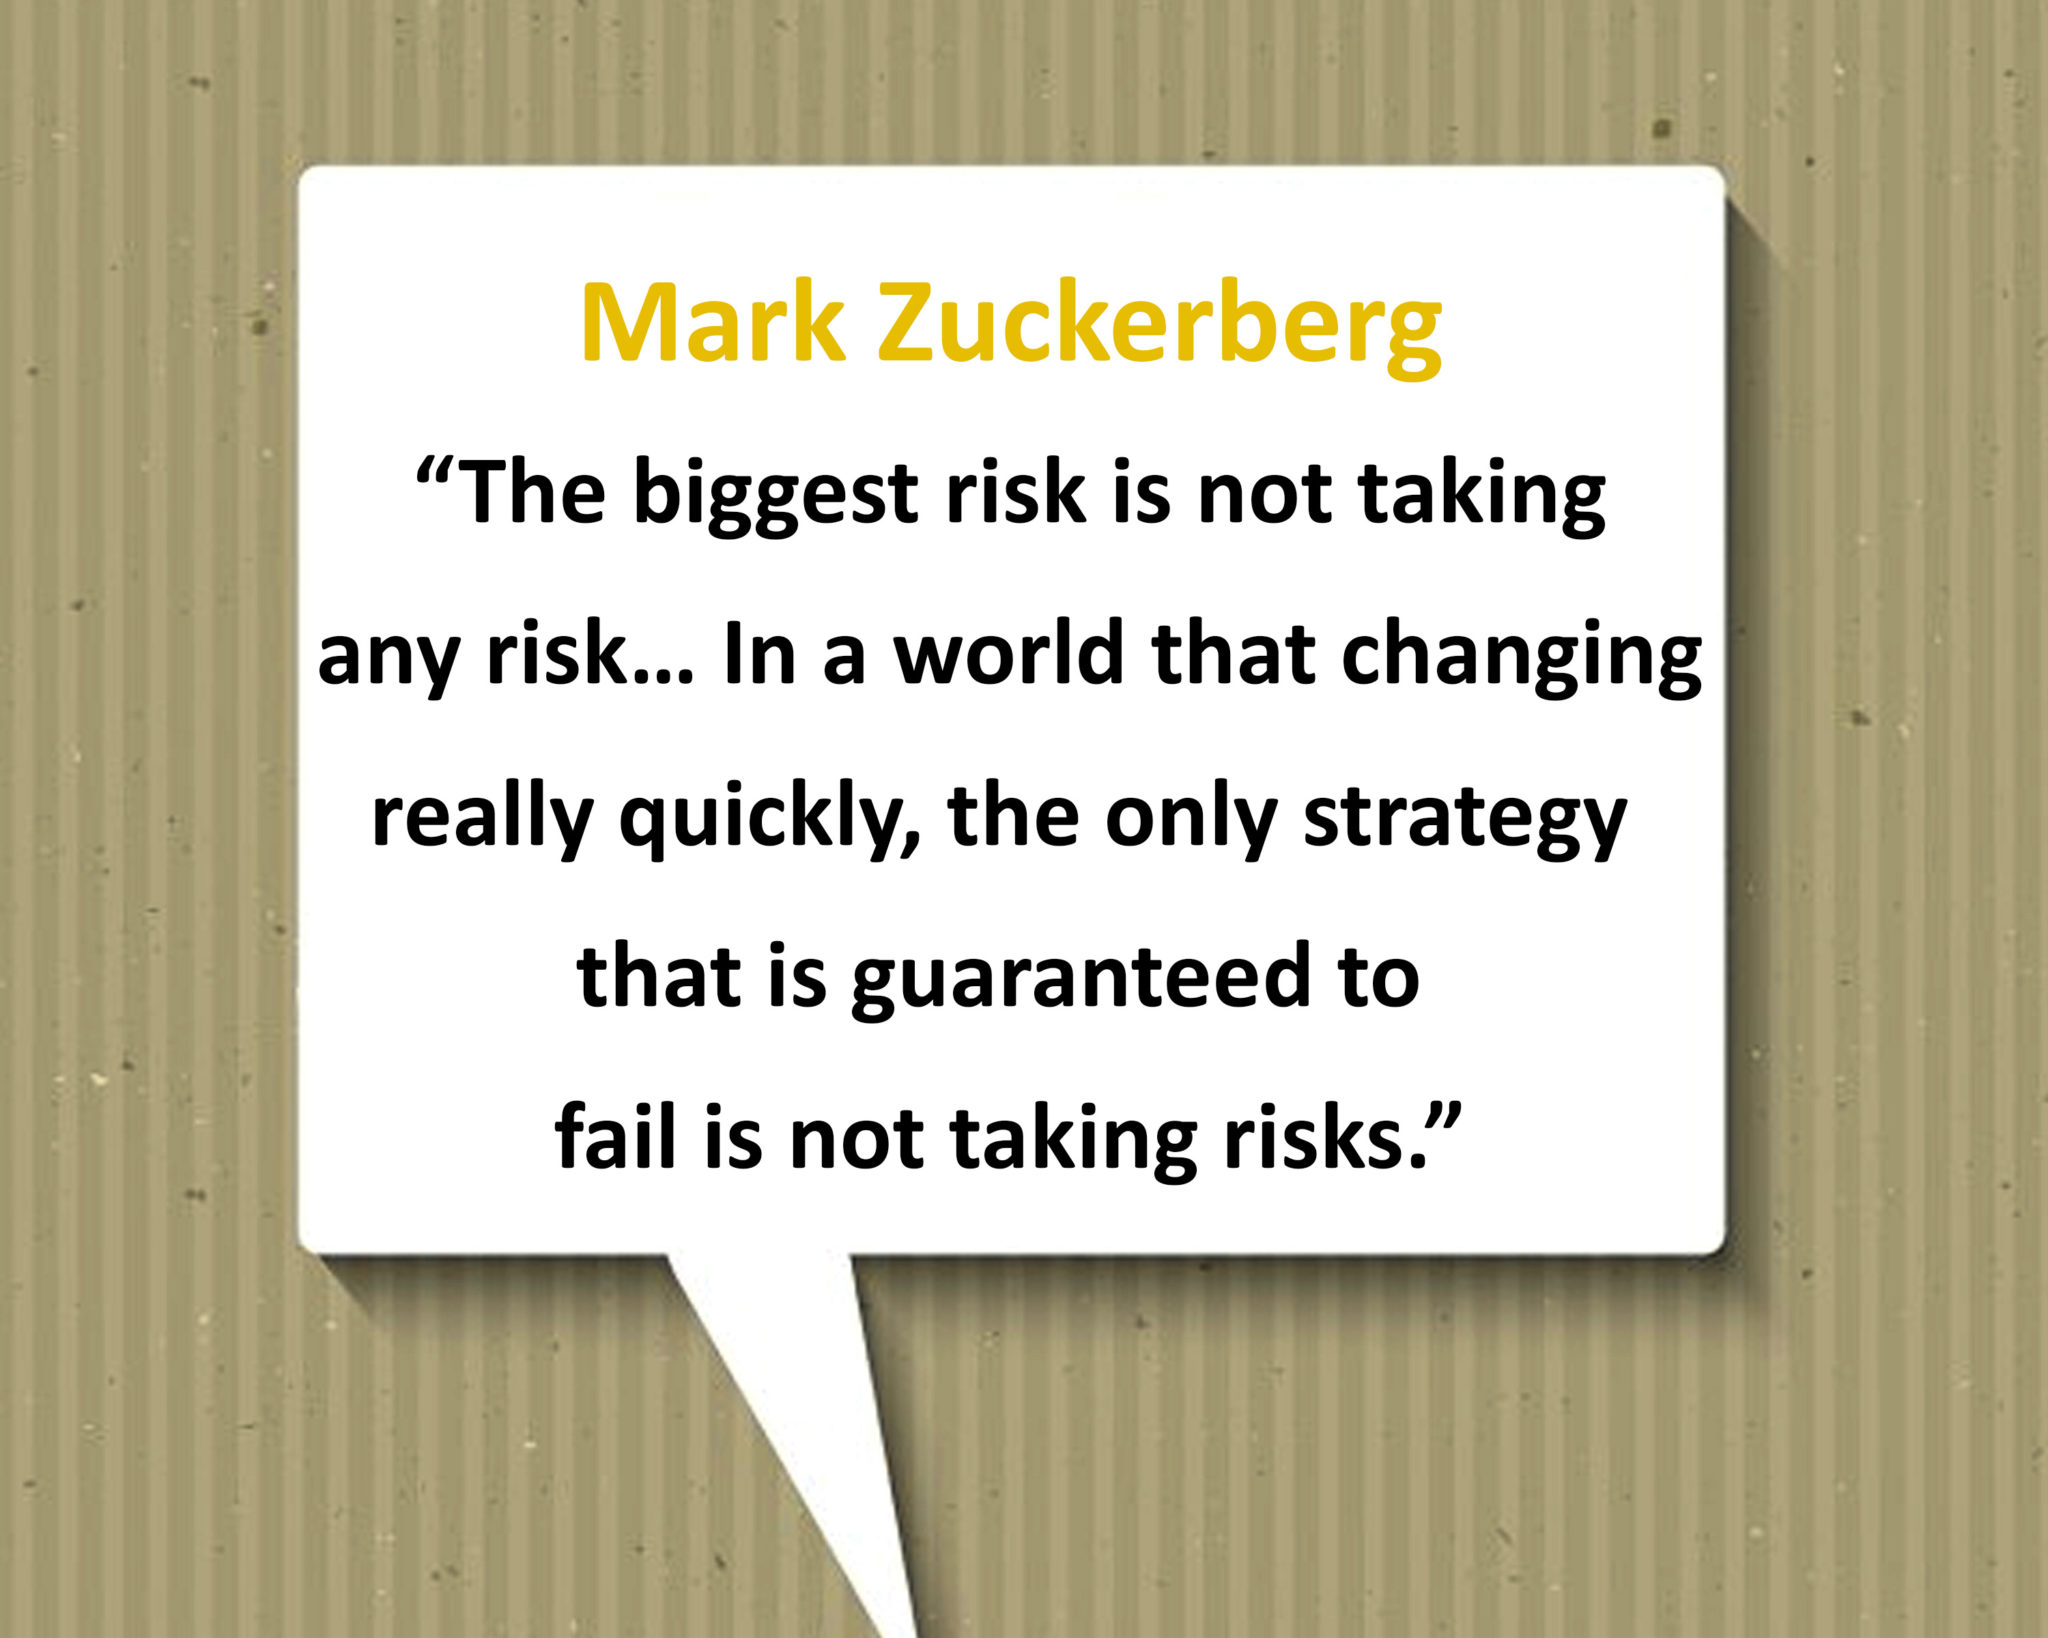 Quotes-from-Billionaires-that-inspire-us